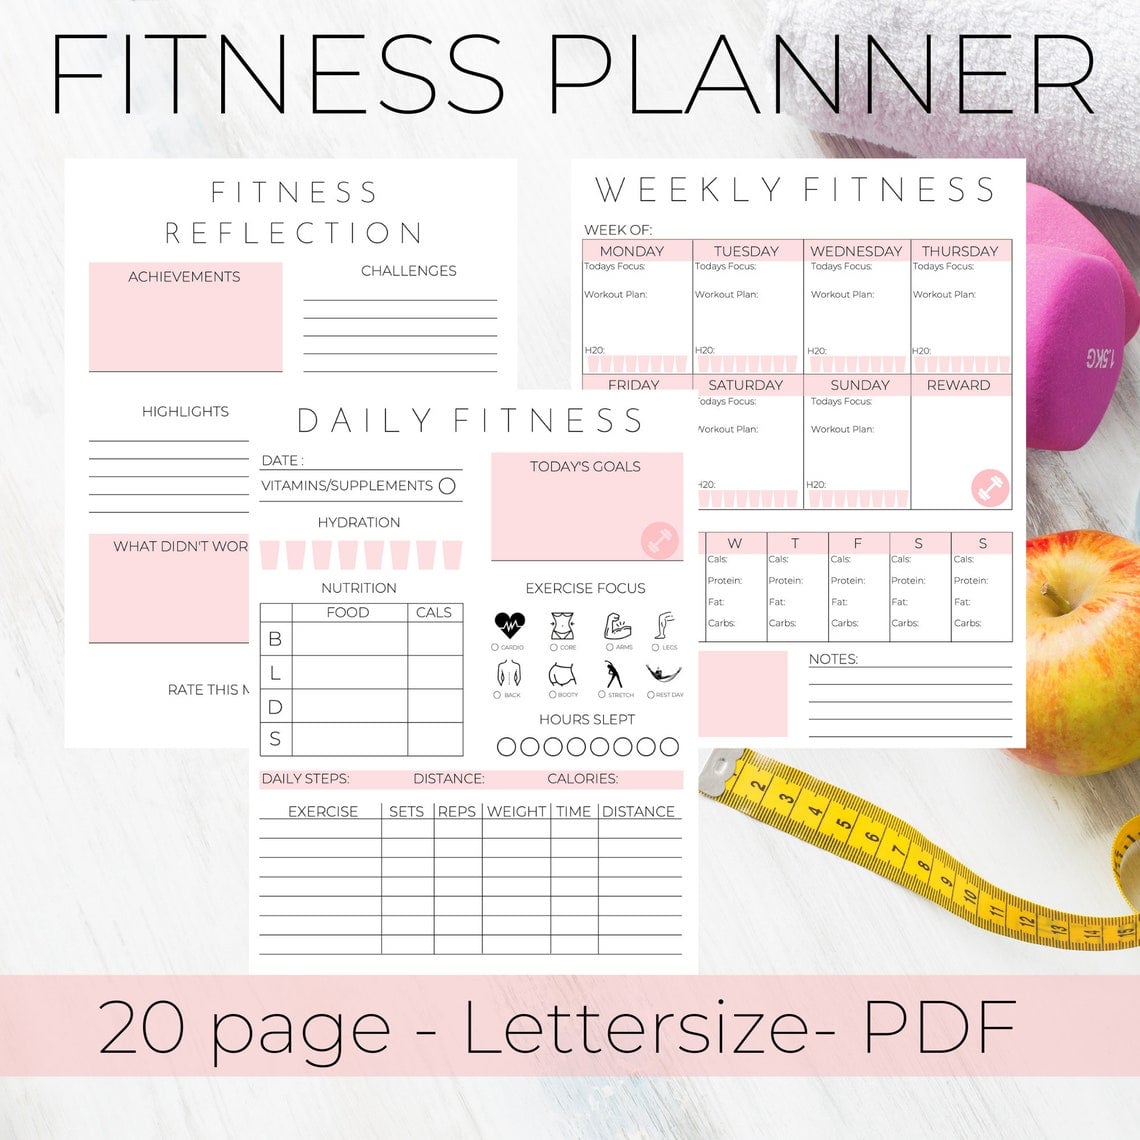 monthly-fitness-printable-planner-fitness-tracker-workout-ubicaciondepersonas-cdmx-gob-mx